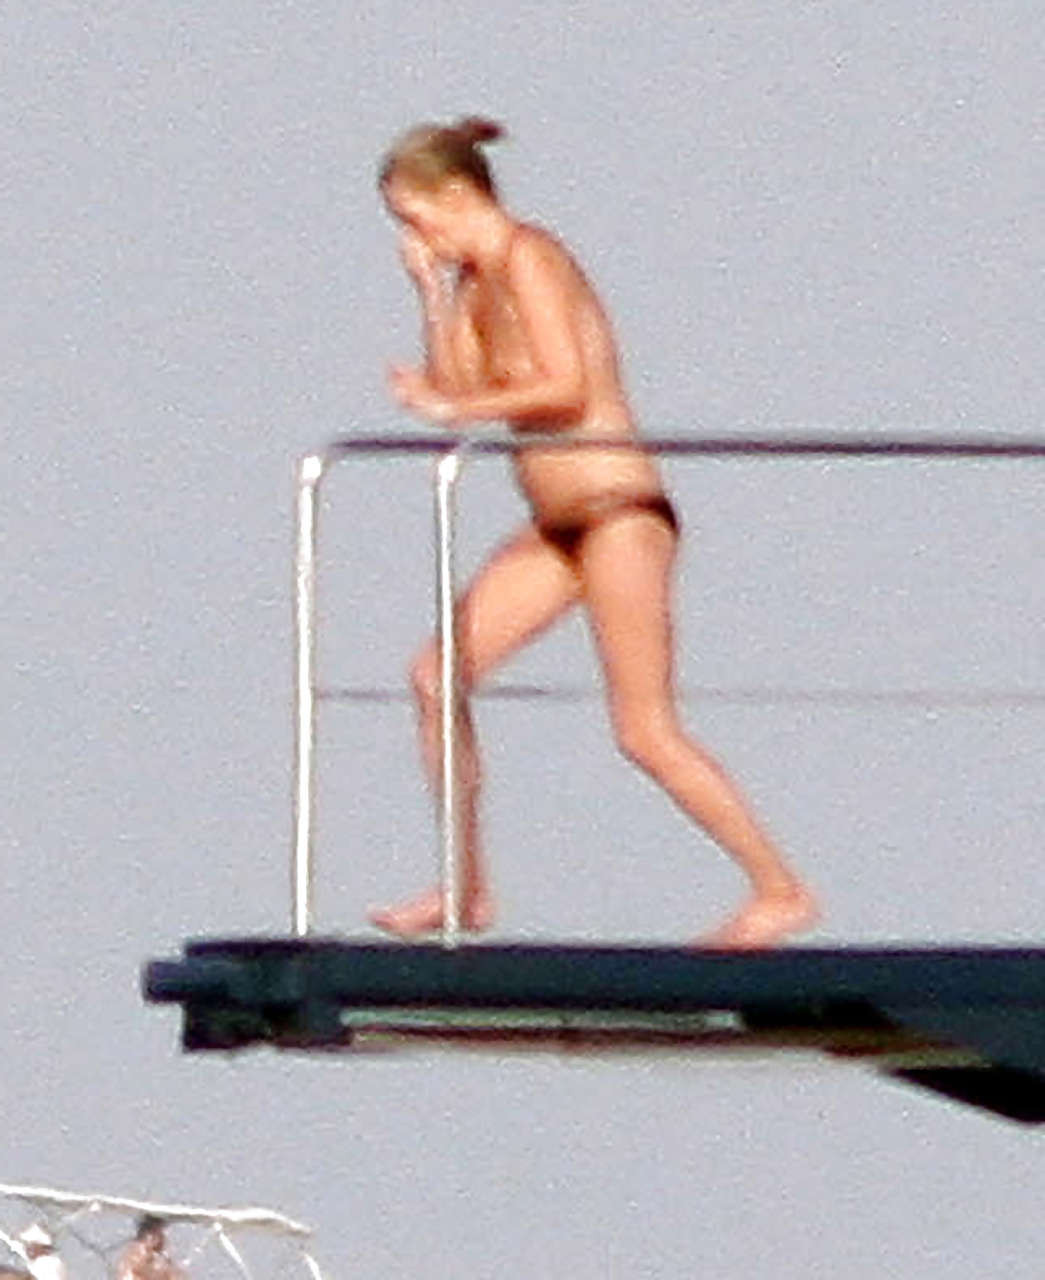 Kate Moss topless jumping from yach and showing her panties paparazzi shoots #75290694